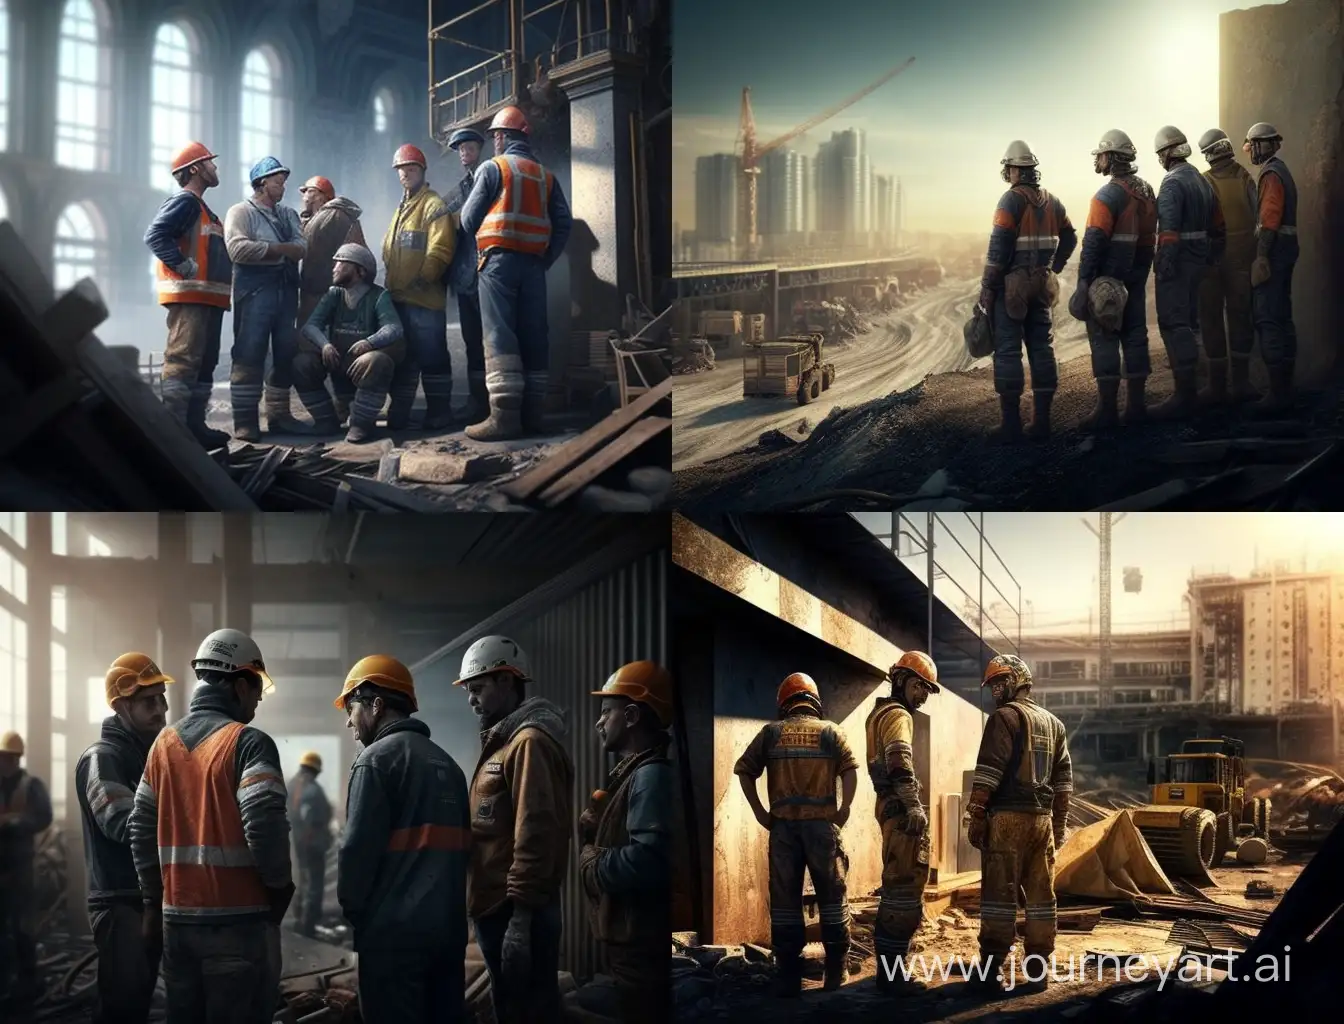 Russian-Construction-Workers-in-Helmets-at-the-Start-of-the-Work-Day